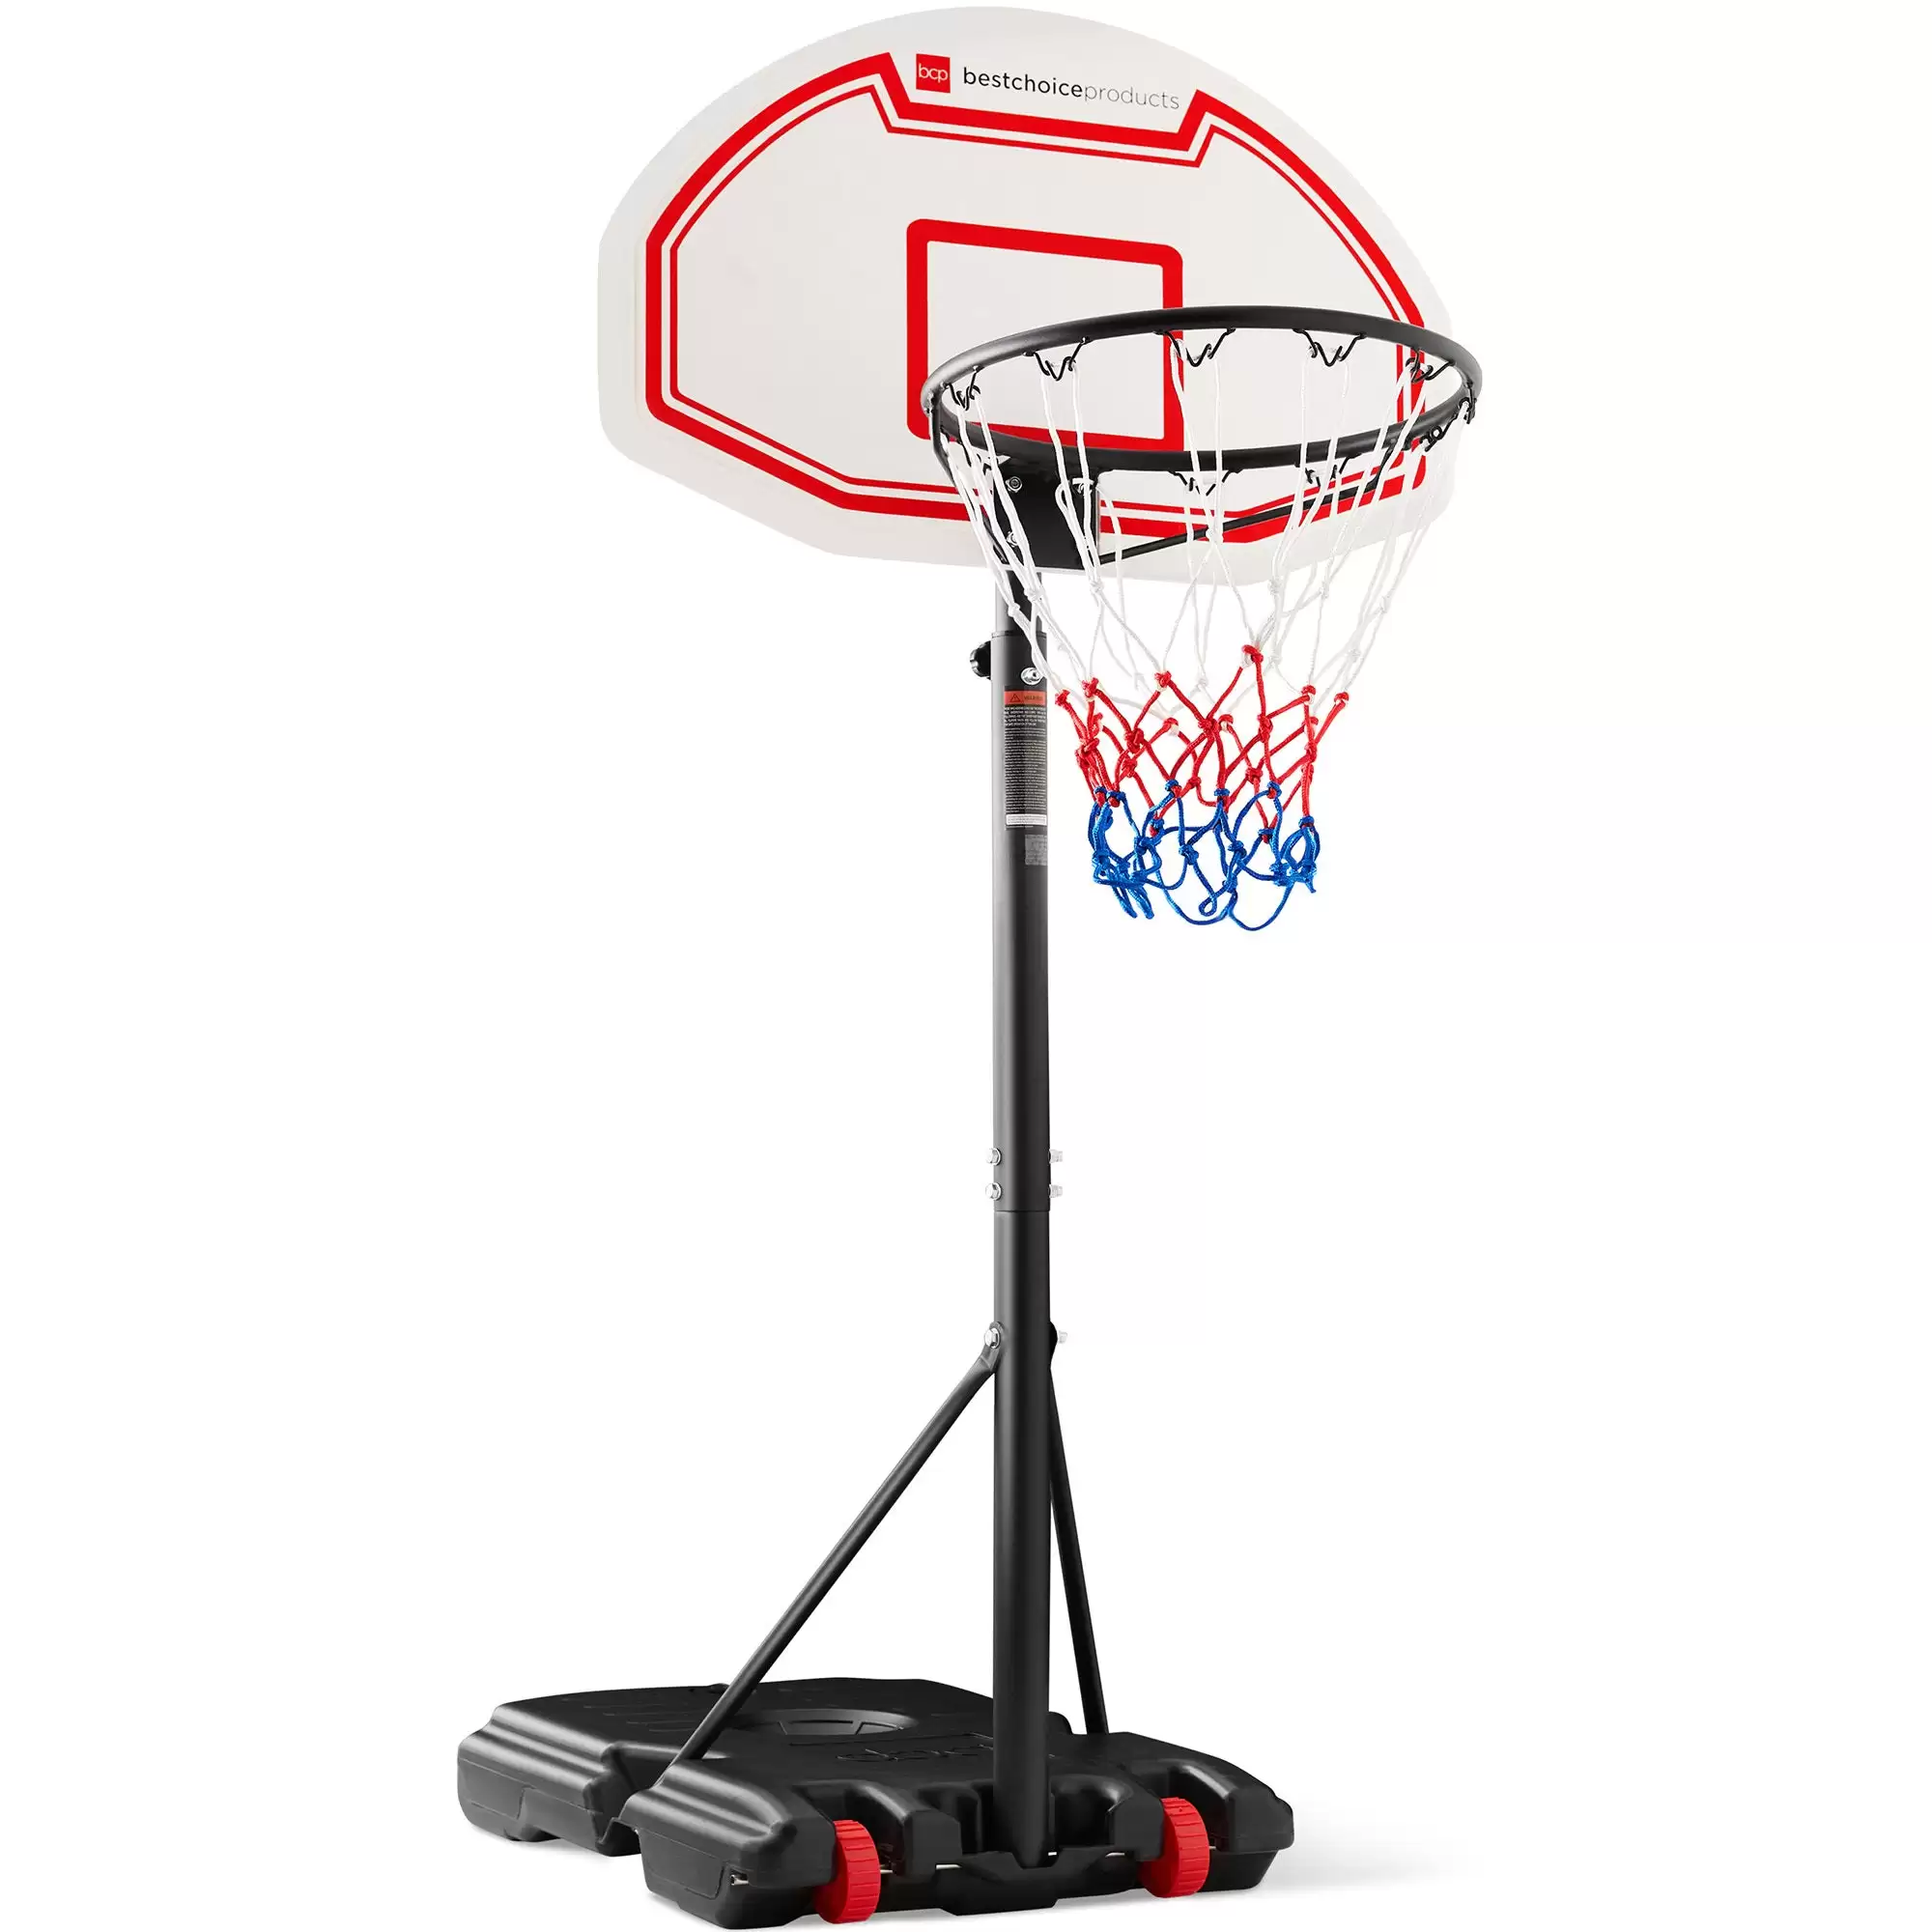 Spend $84.99 Kids Height-Adjustable Basketball Hoop, Portable Backboard System W/ Wheels At Bestchoiceproducts